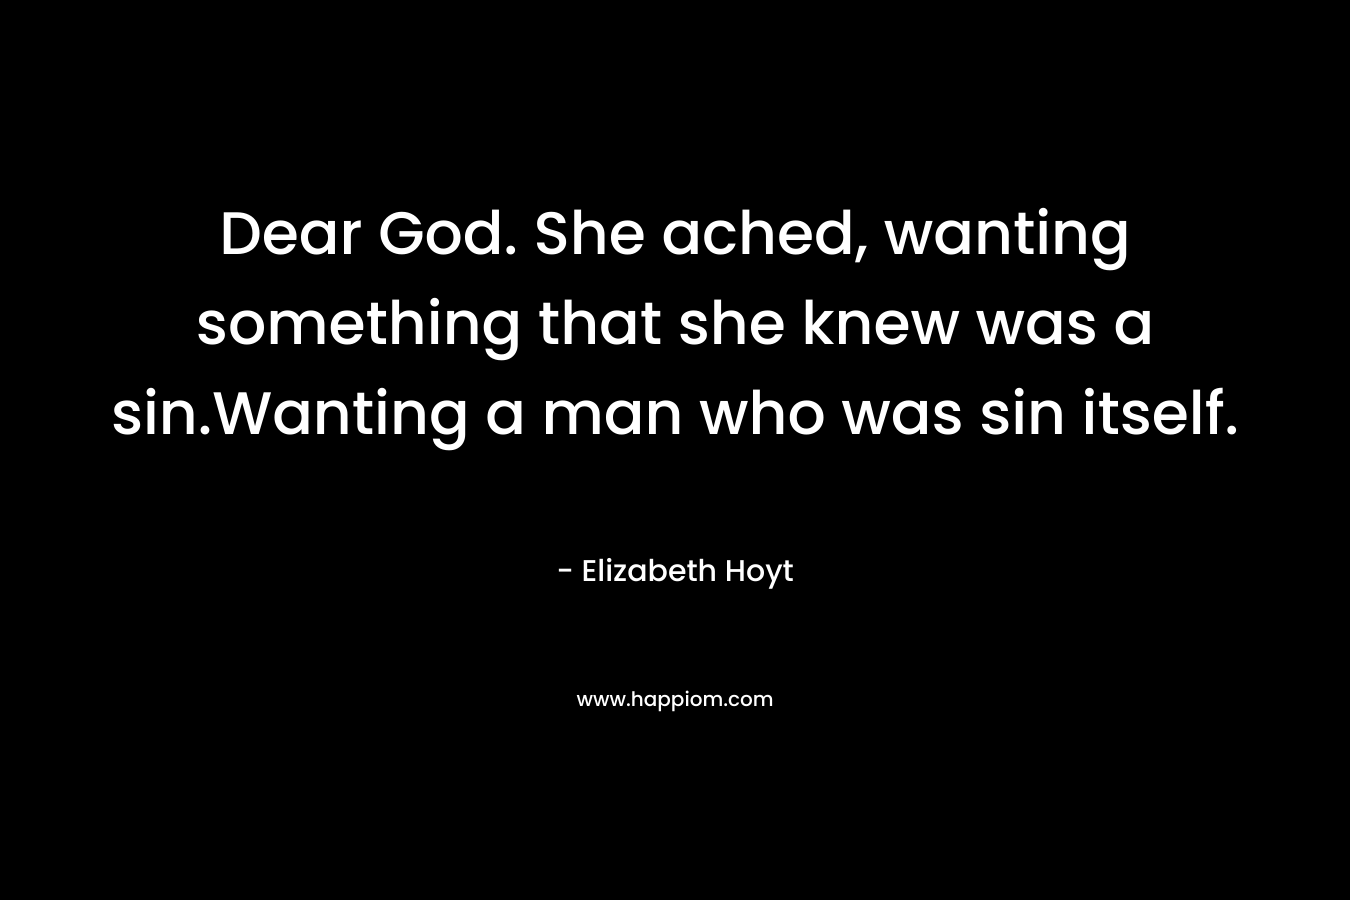 Dear God. She ached, wanting something that she knew was a sin.Wanting a man who was sin itself.